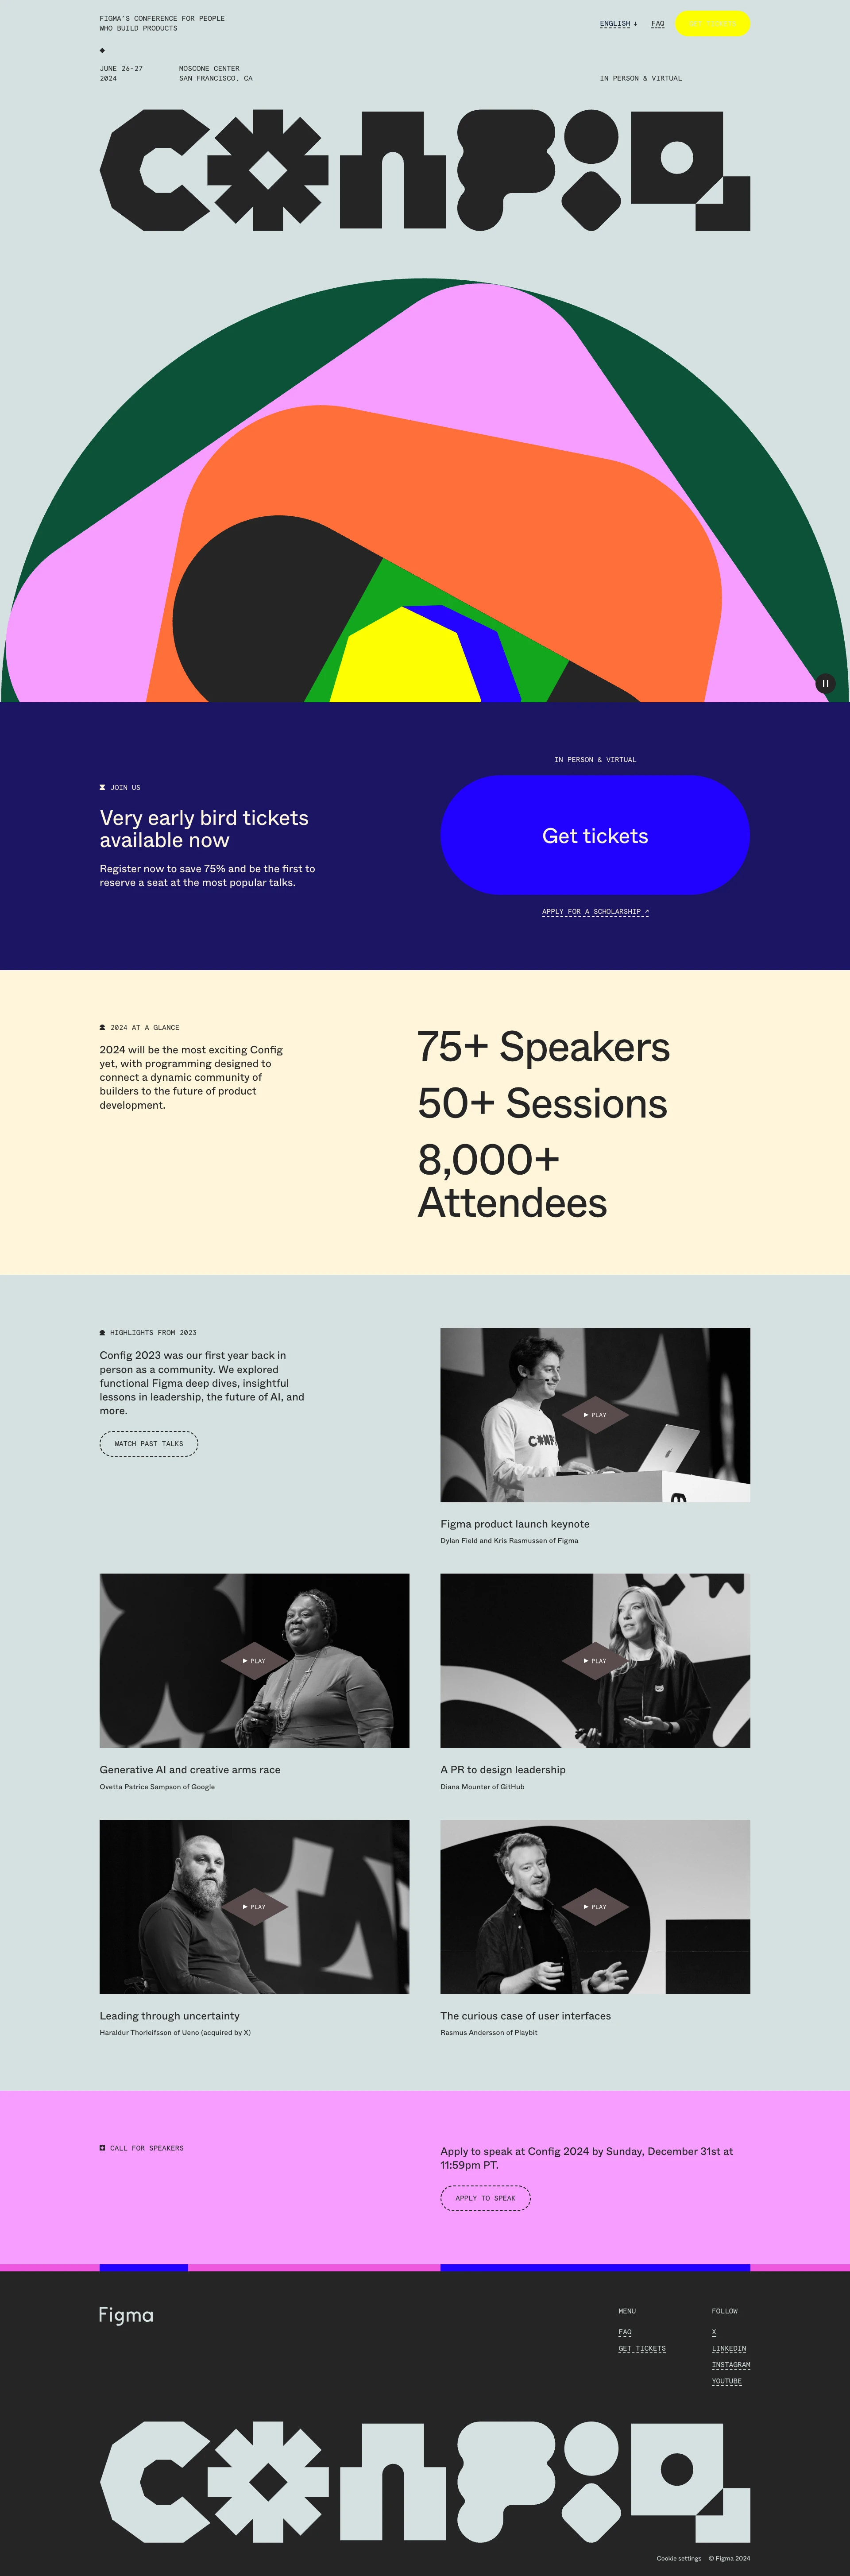 Config 2024 by Figma Landing Page Example: 2024 will be the most exciting Config yet! Join us in-person in San Francisco, or virtually June 26-27. 